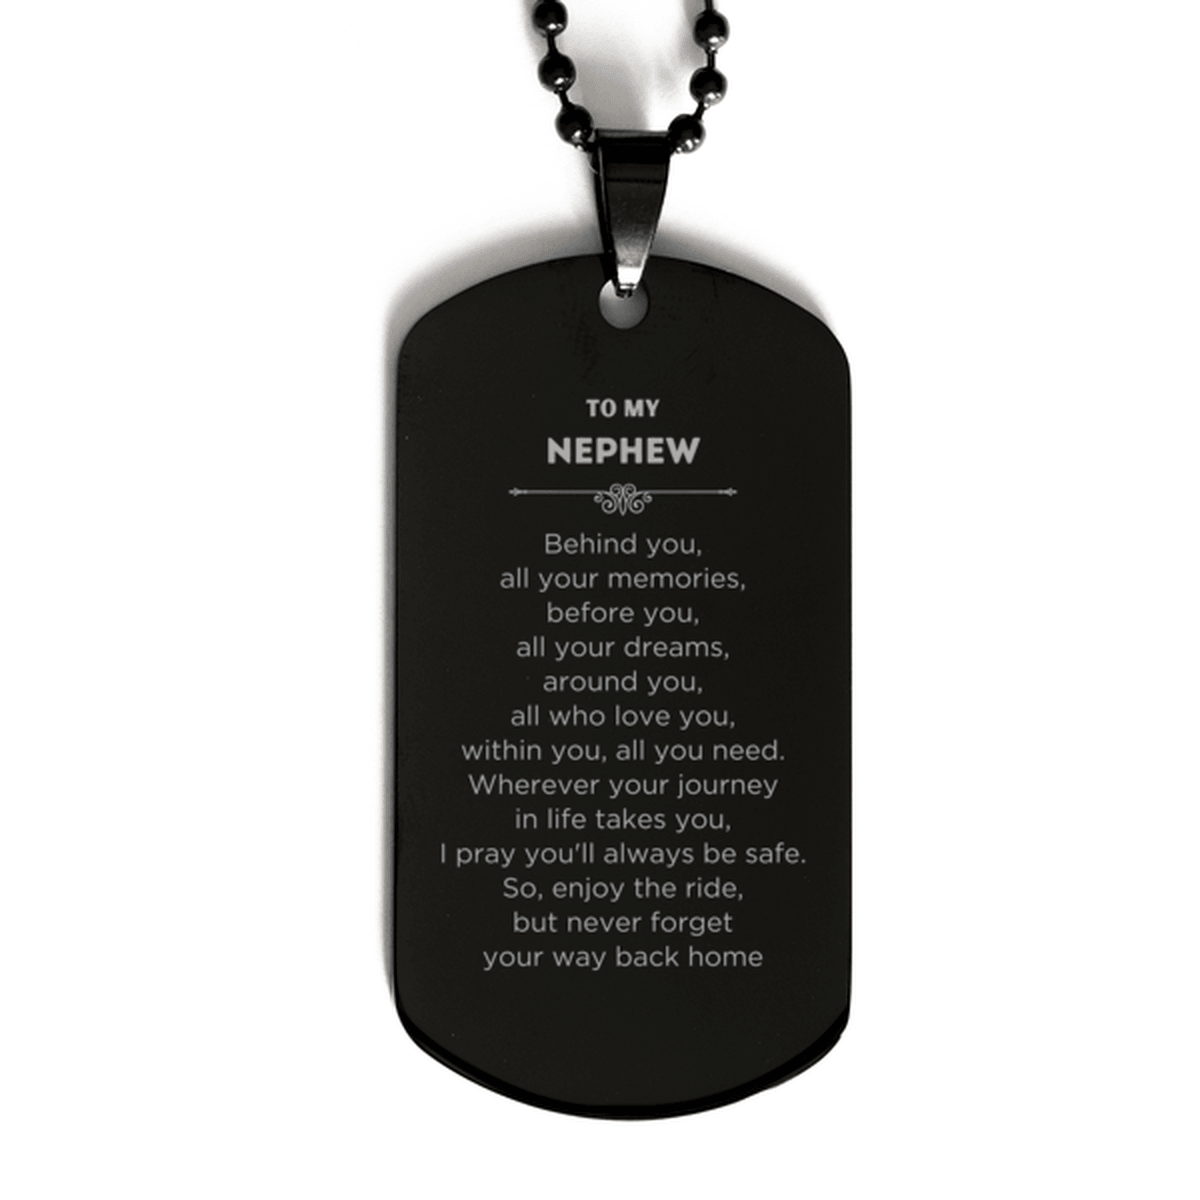 Nephew Black Dog Tag Necklace Bracelet Birthday Christmas Unique Gifts Behind you, all your memories, before you, all your dreams - Mallard Moon Gift Shop